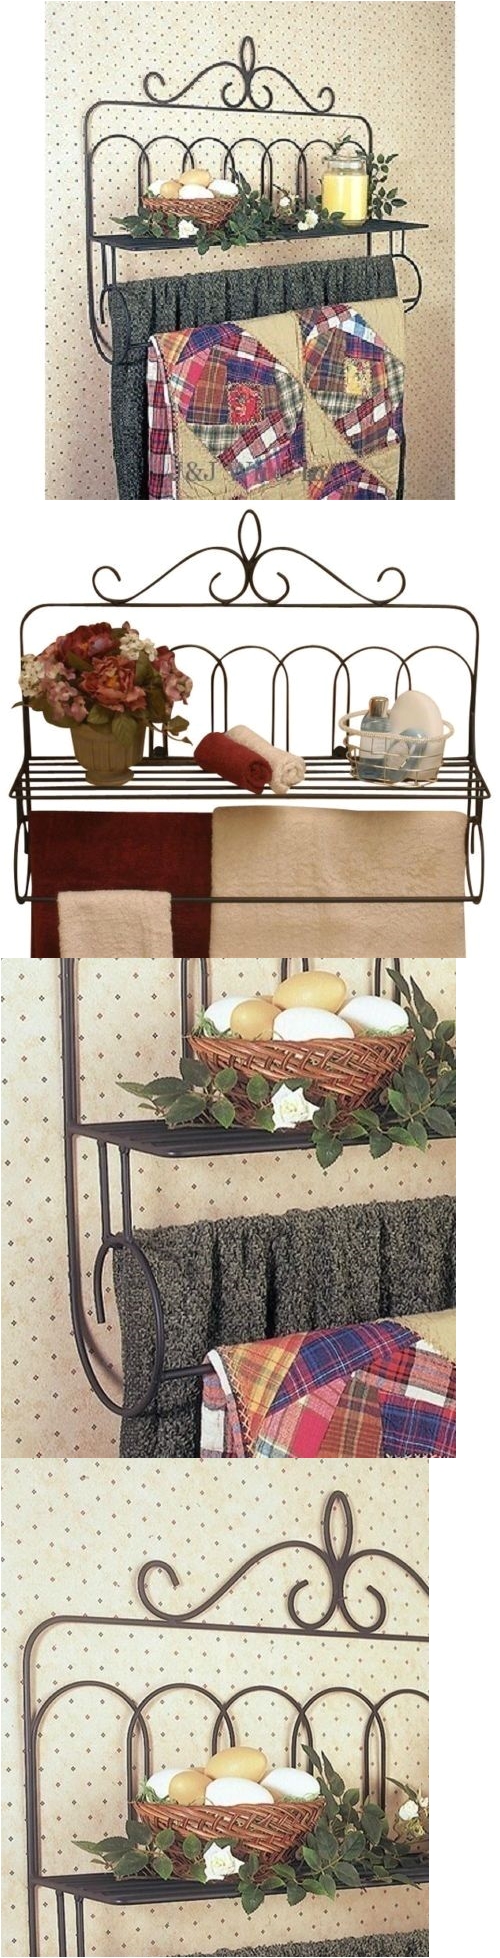 Wrought Iron Wall Mounted Quilt Rack Quilt Hangers and Stands 83959 Quilt Rack Wall Mount Hanger with